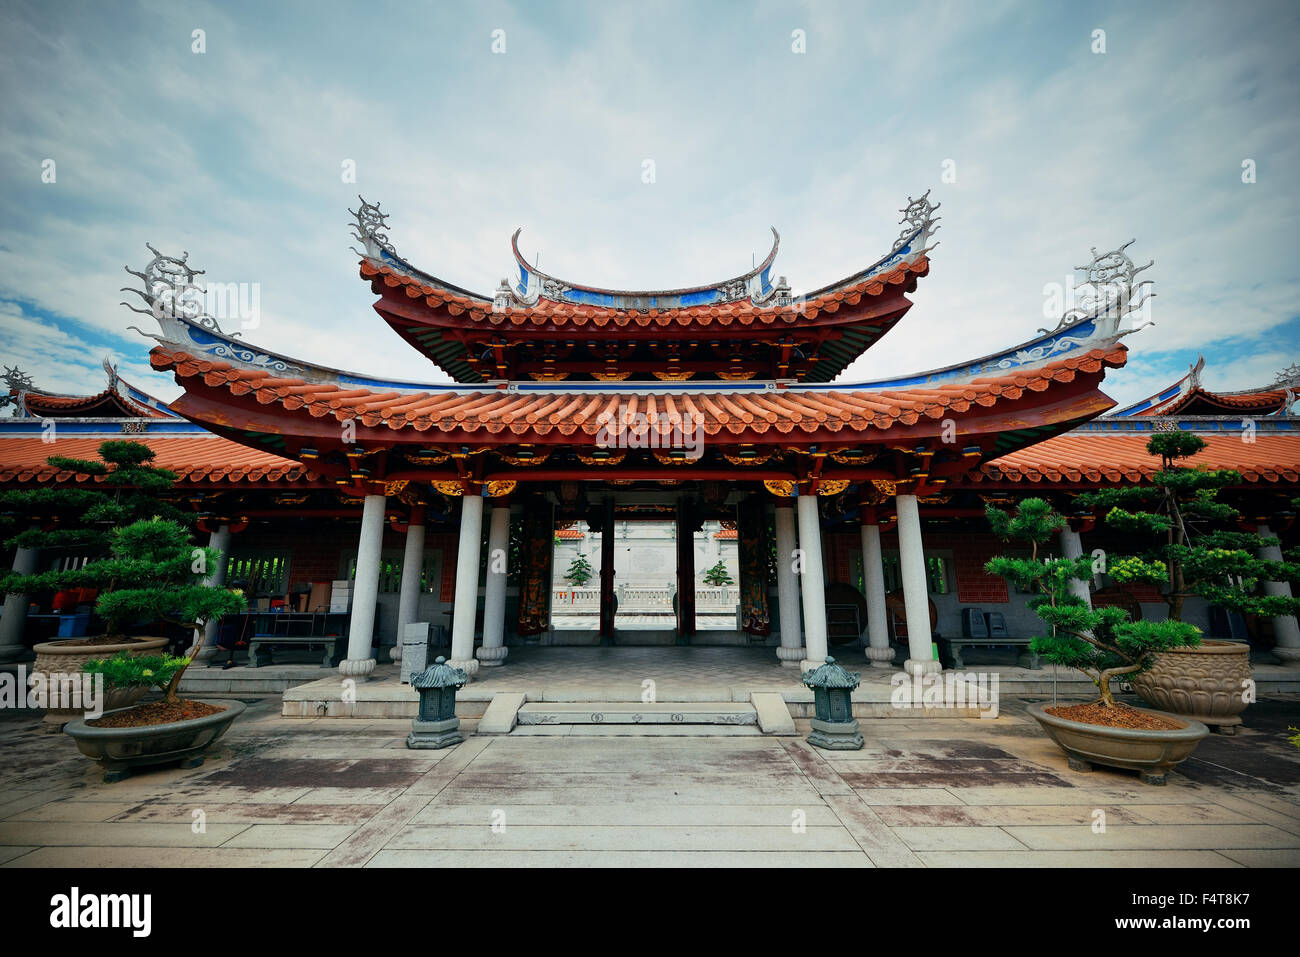 Chinese Buddhism temple in Singapore Stock Photo